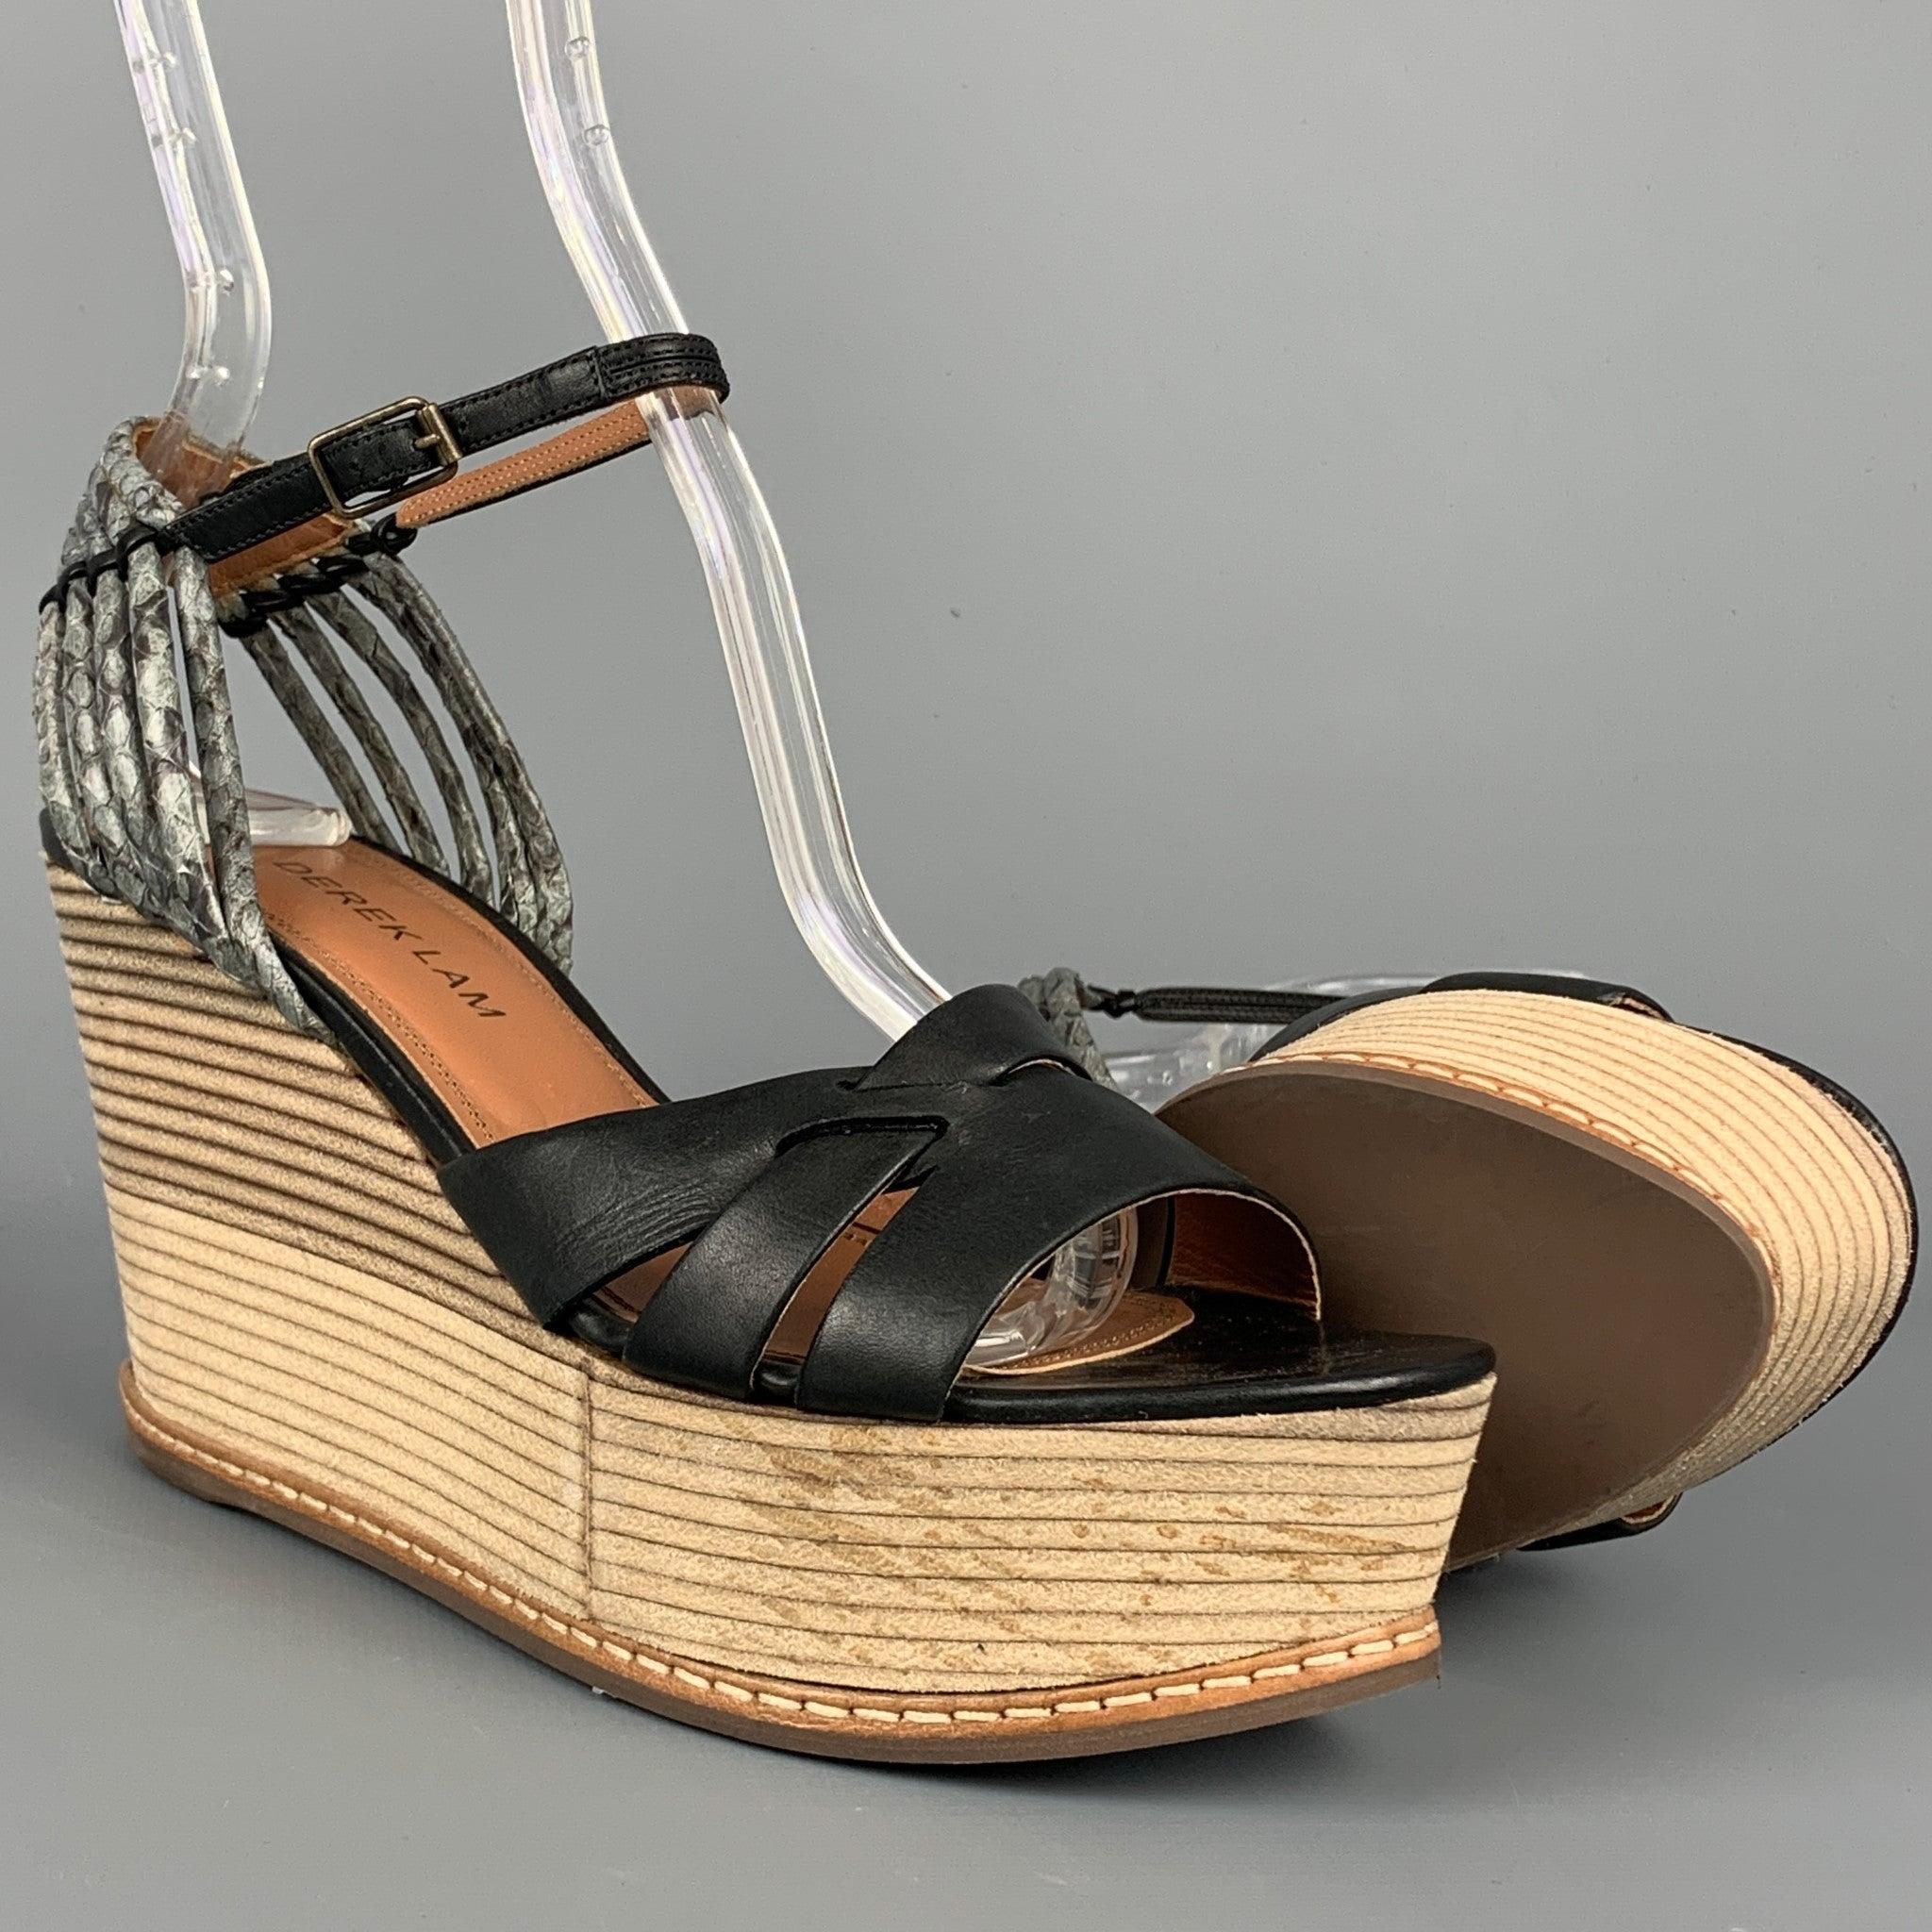 DEREK LAM Size 6 Black & Tan Leather Wood Wedge Sandals In Good Condition For Sale In San Francisco, CA